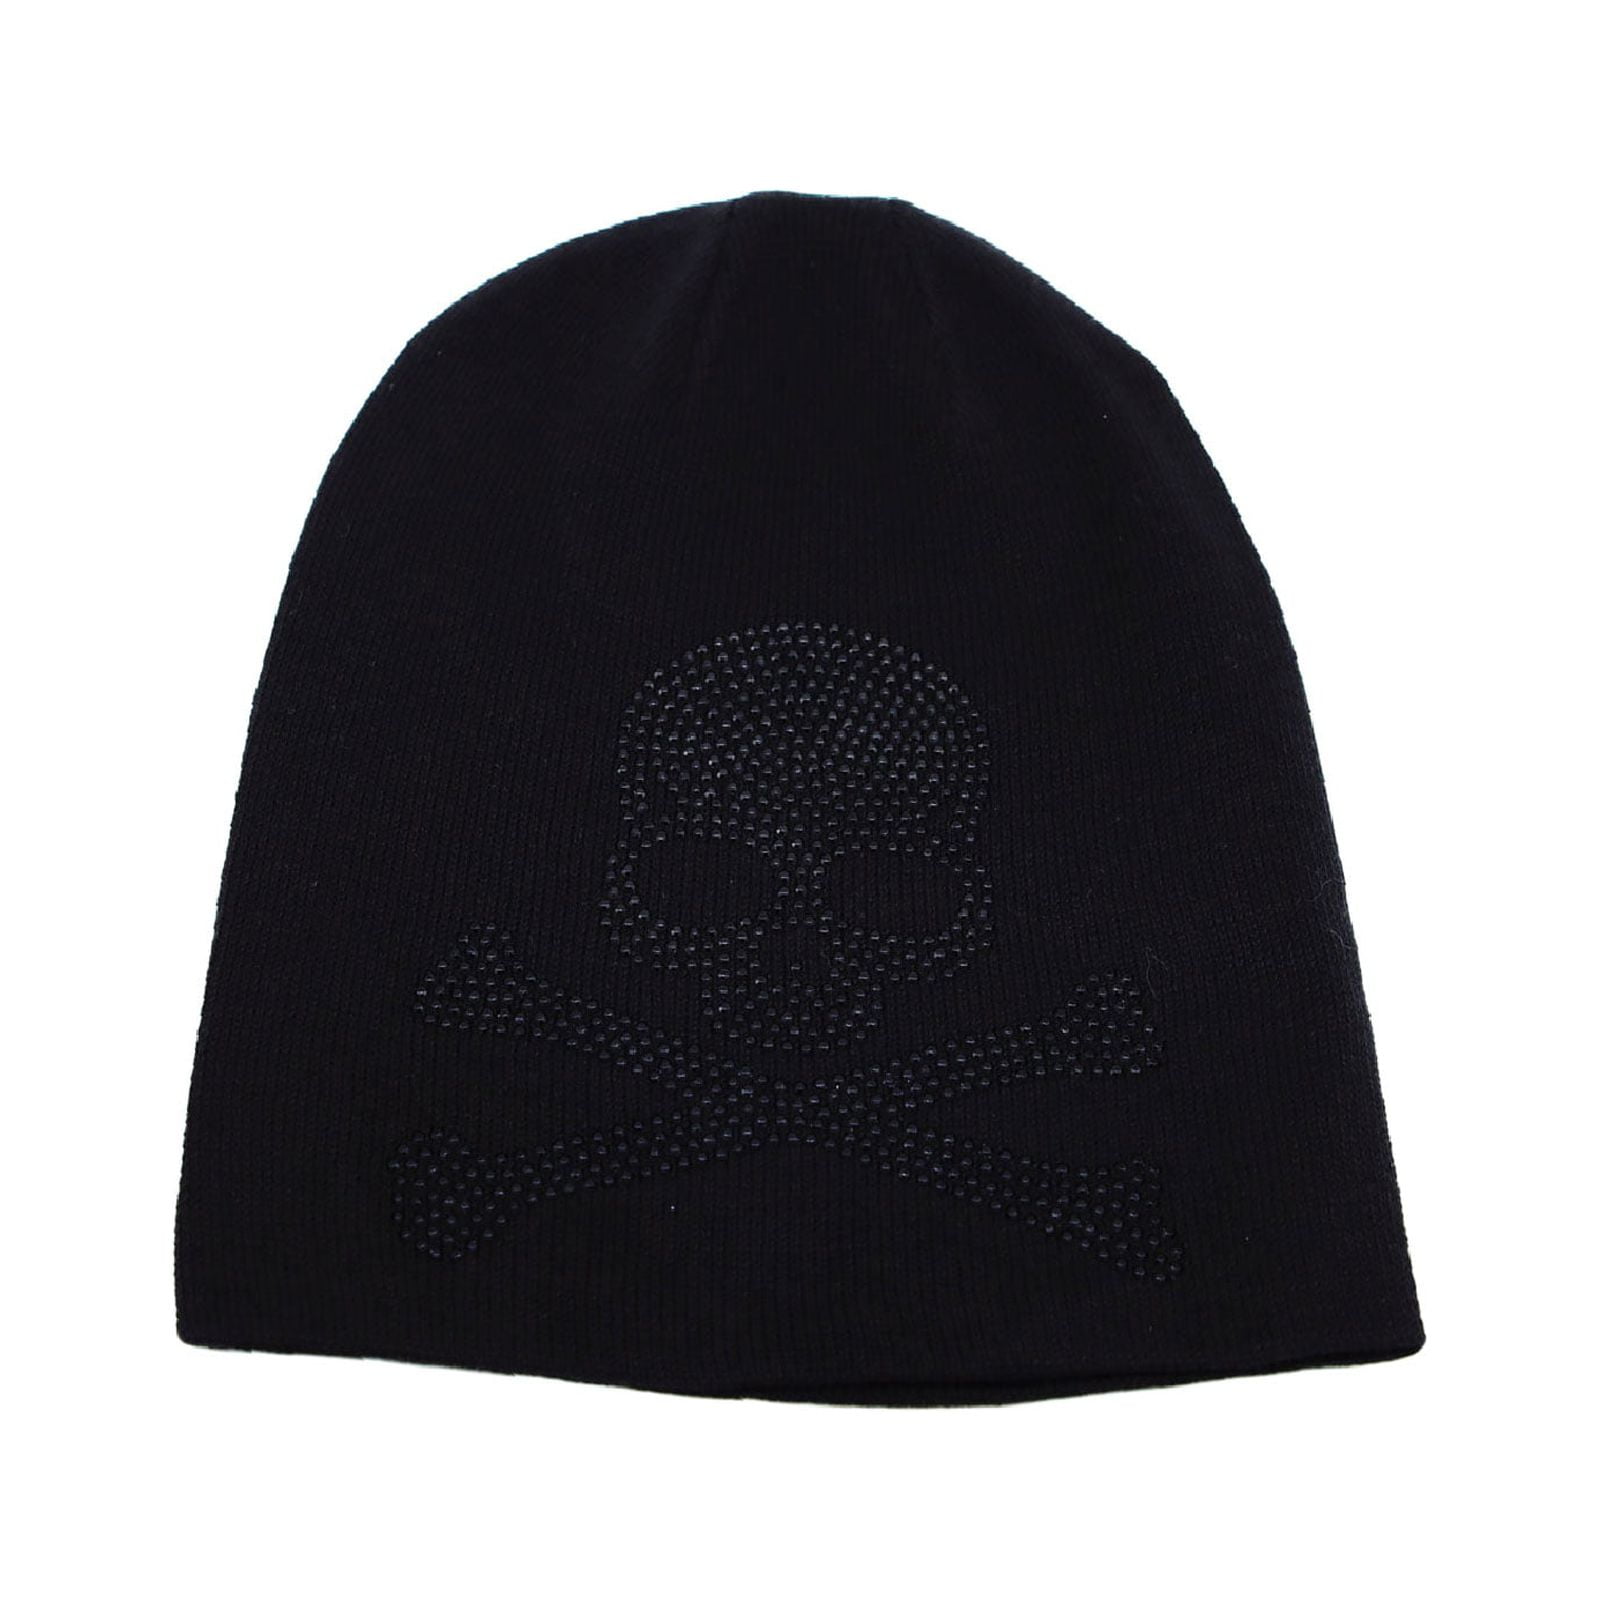 WITHMOONS Unisex Cotton Skull Rhinestone Beanie Hat Knitted Cap YT51352  (Silver)